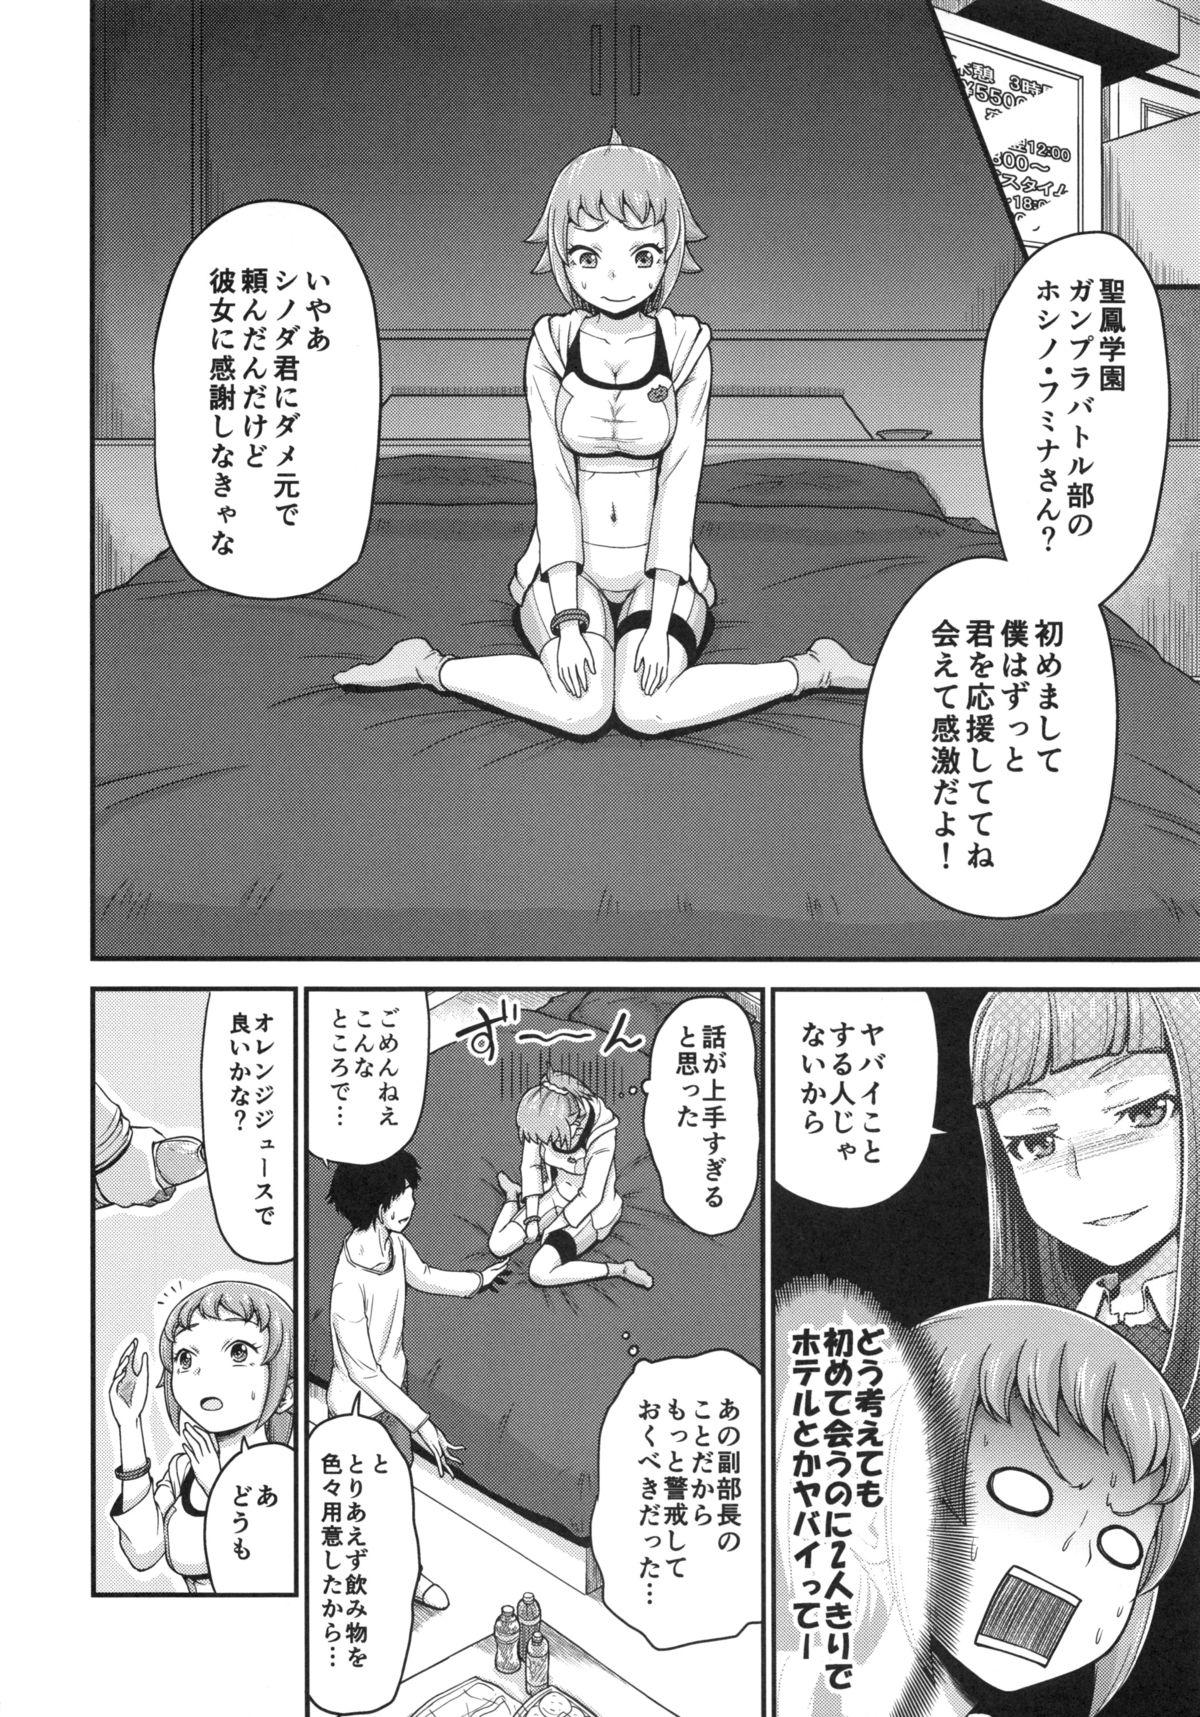 Edging Fuminax Try - Gundam build fighters try Doggystyle - Page 3